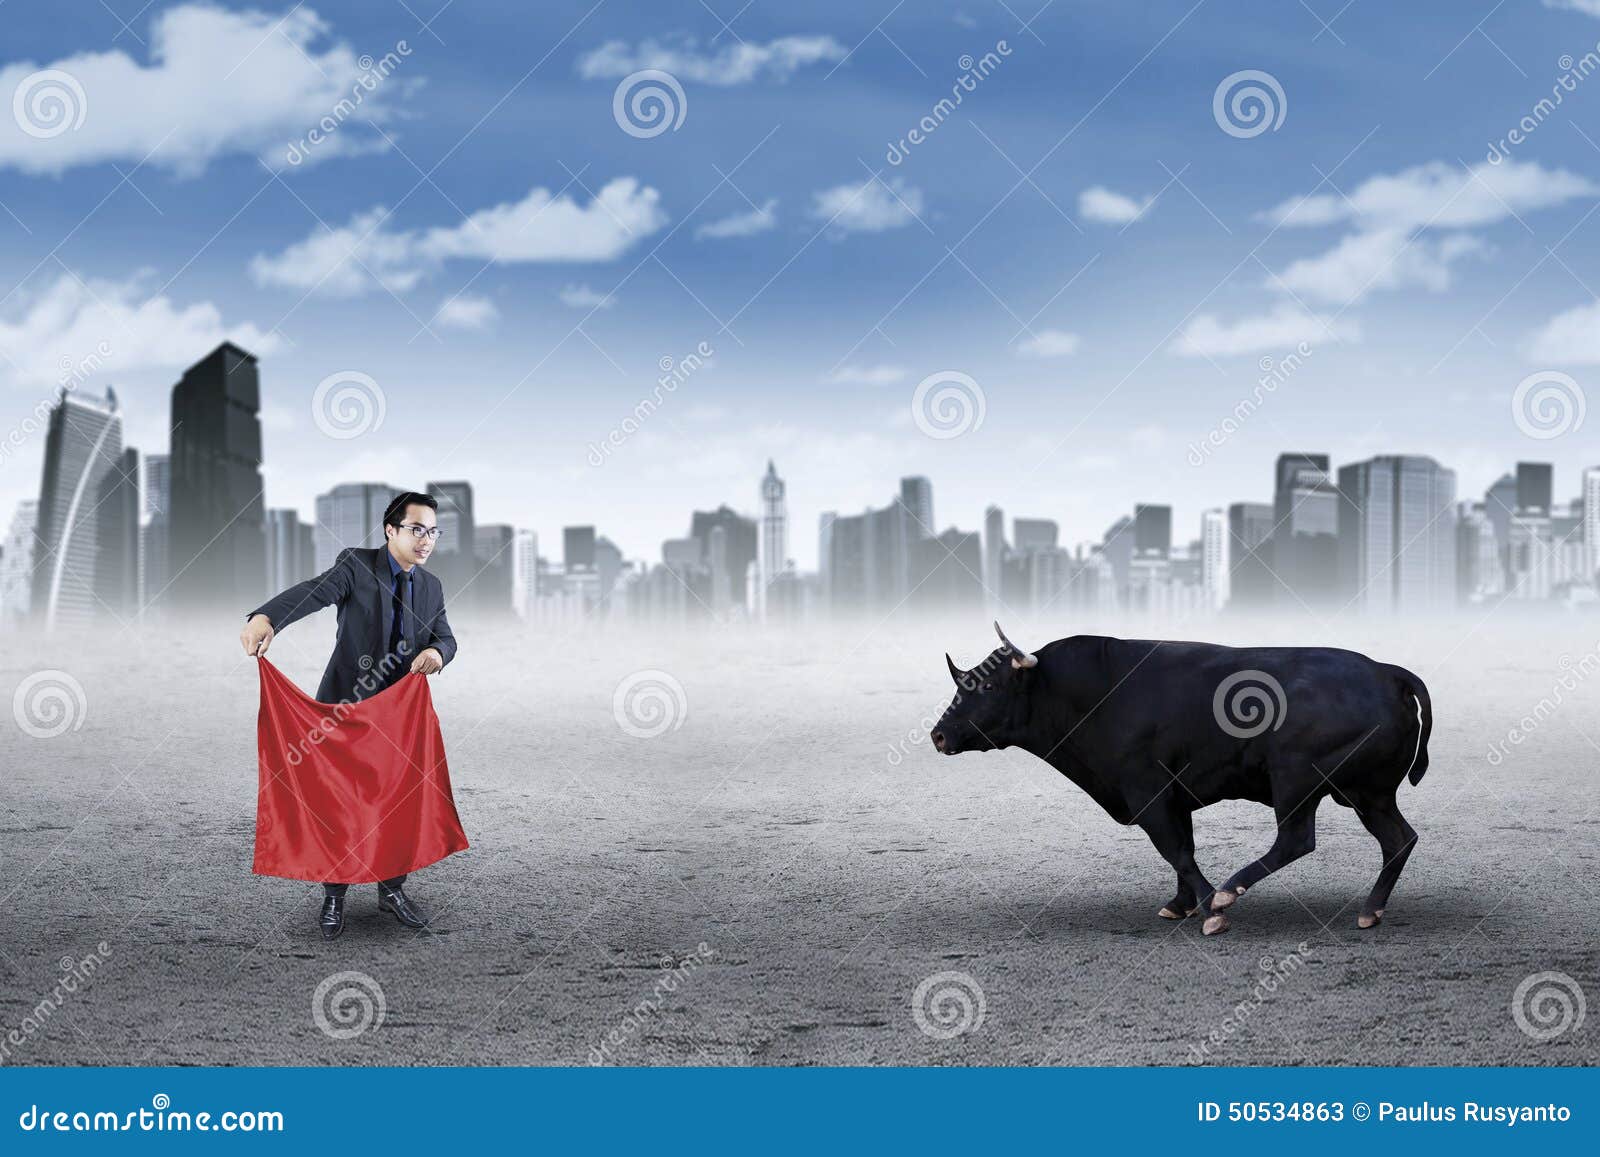 519 Bullfighter Bull Red Stock Photos - Free & Royalty-Free Stock Photos  from Dreamstime